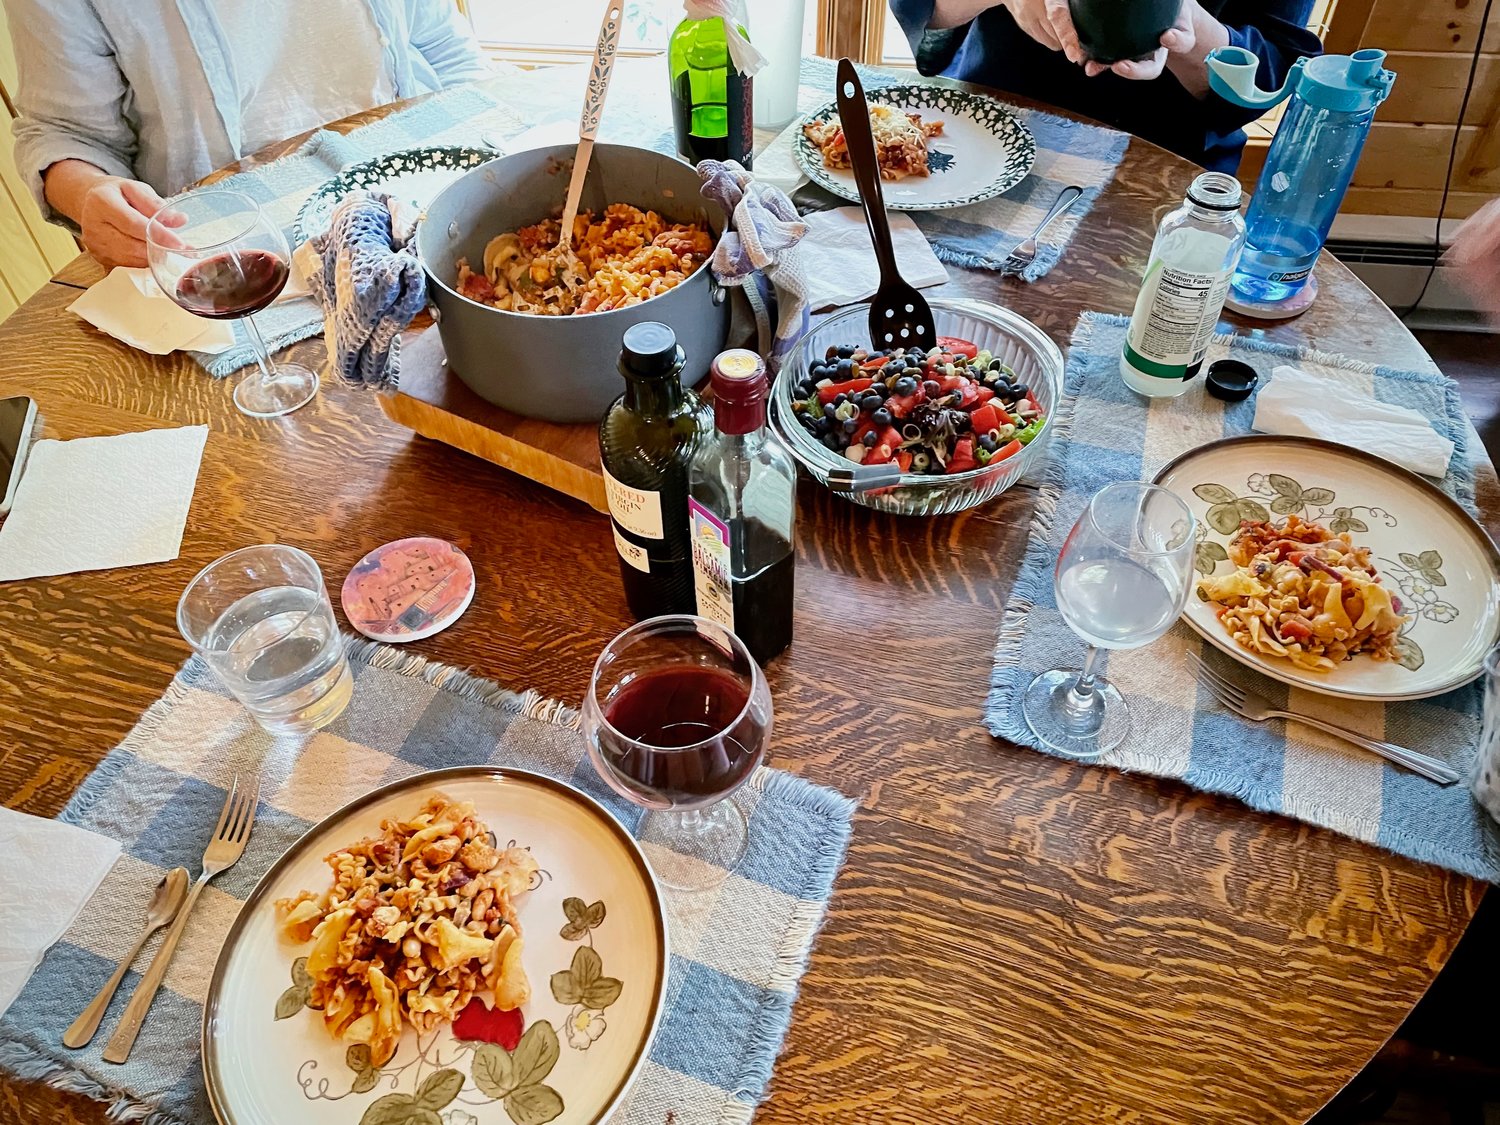 Simple pleasures of a homecooked meal and camaraderie contribute to the sense of north woods well-being. (Photo by Susan Schaefer)